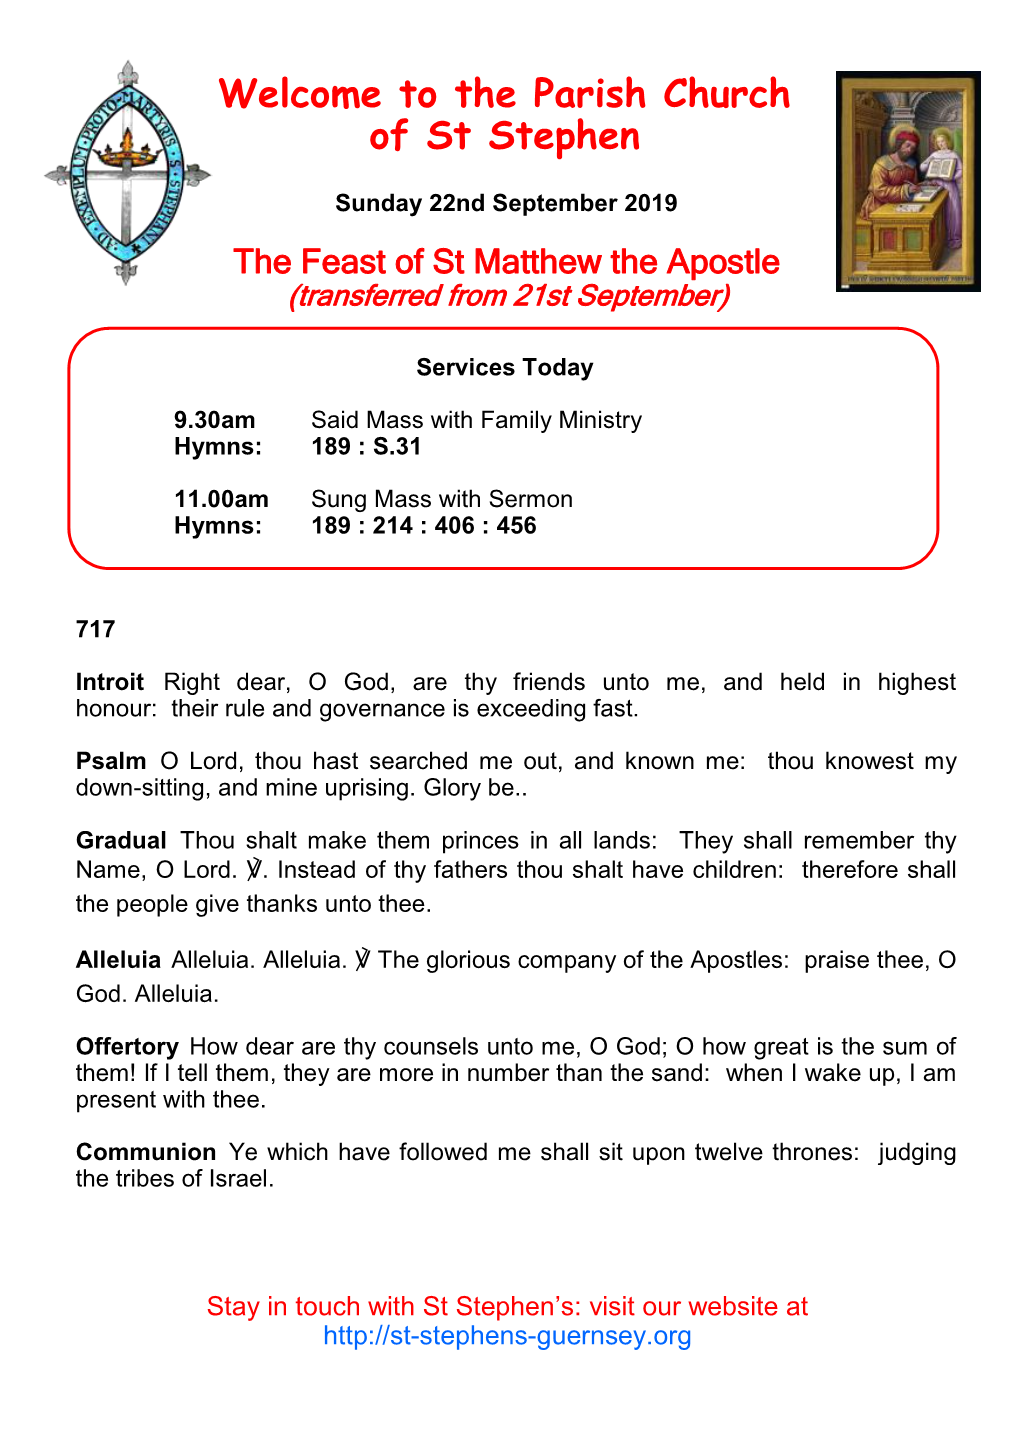 The Feast of St Matthew the Apostle (Transferred from 21St September)